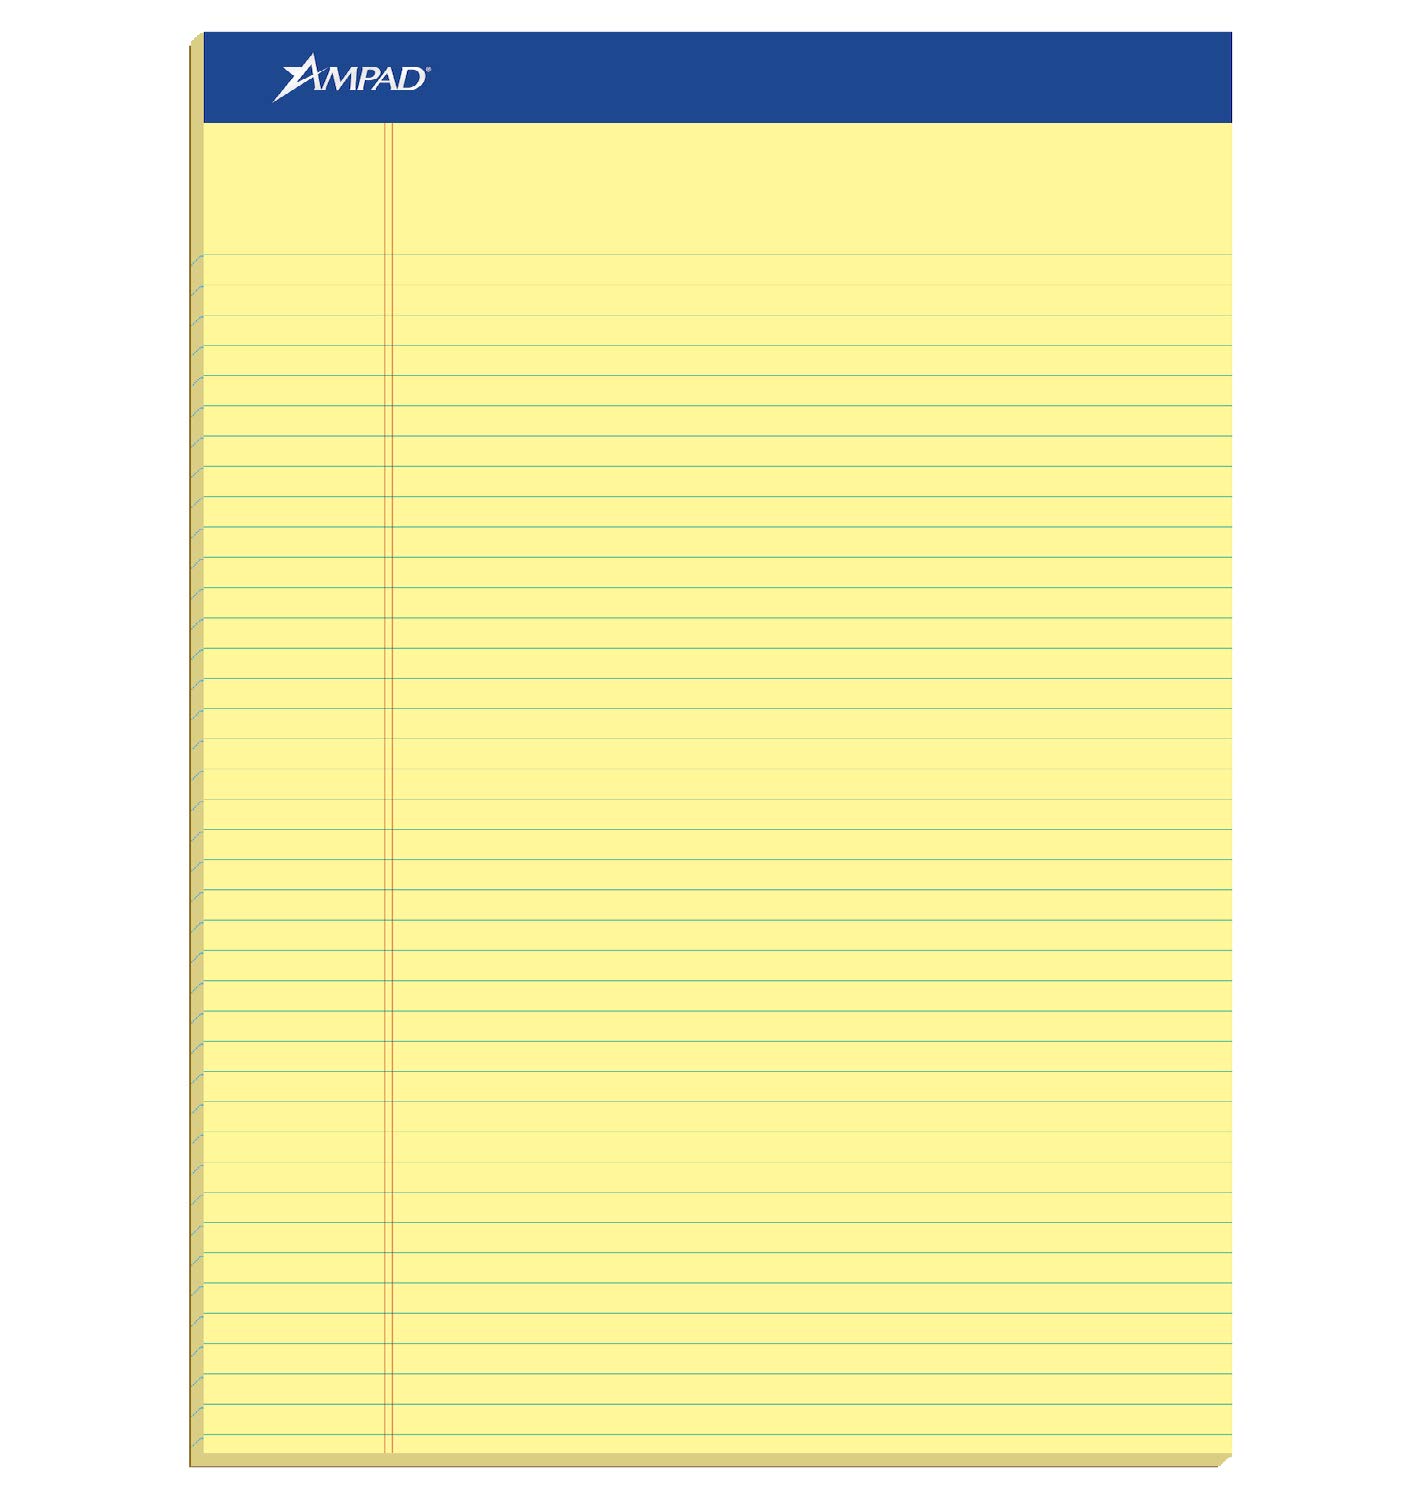 Ampad 20222 Perforated Writing Pad, 8 1/2 x 11 3/4, Canary, 50 Sheets (Pack of 12)